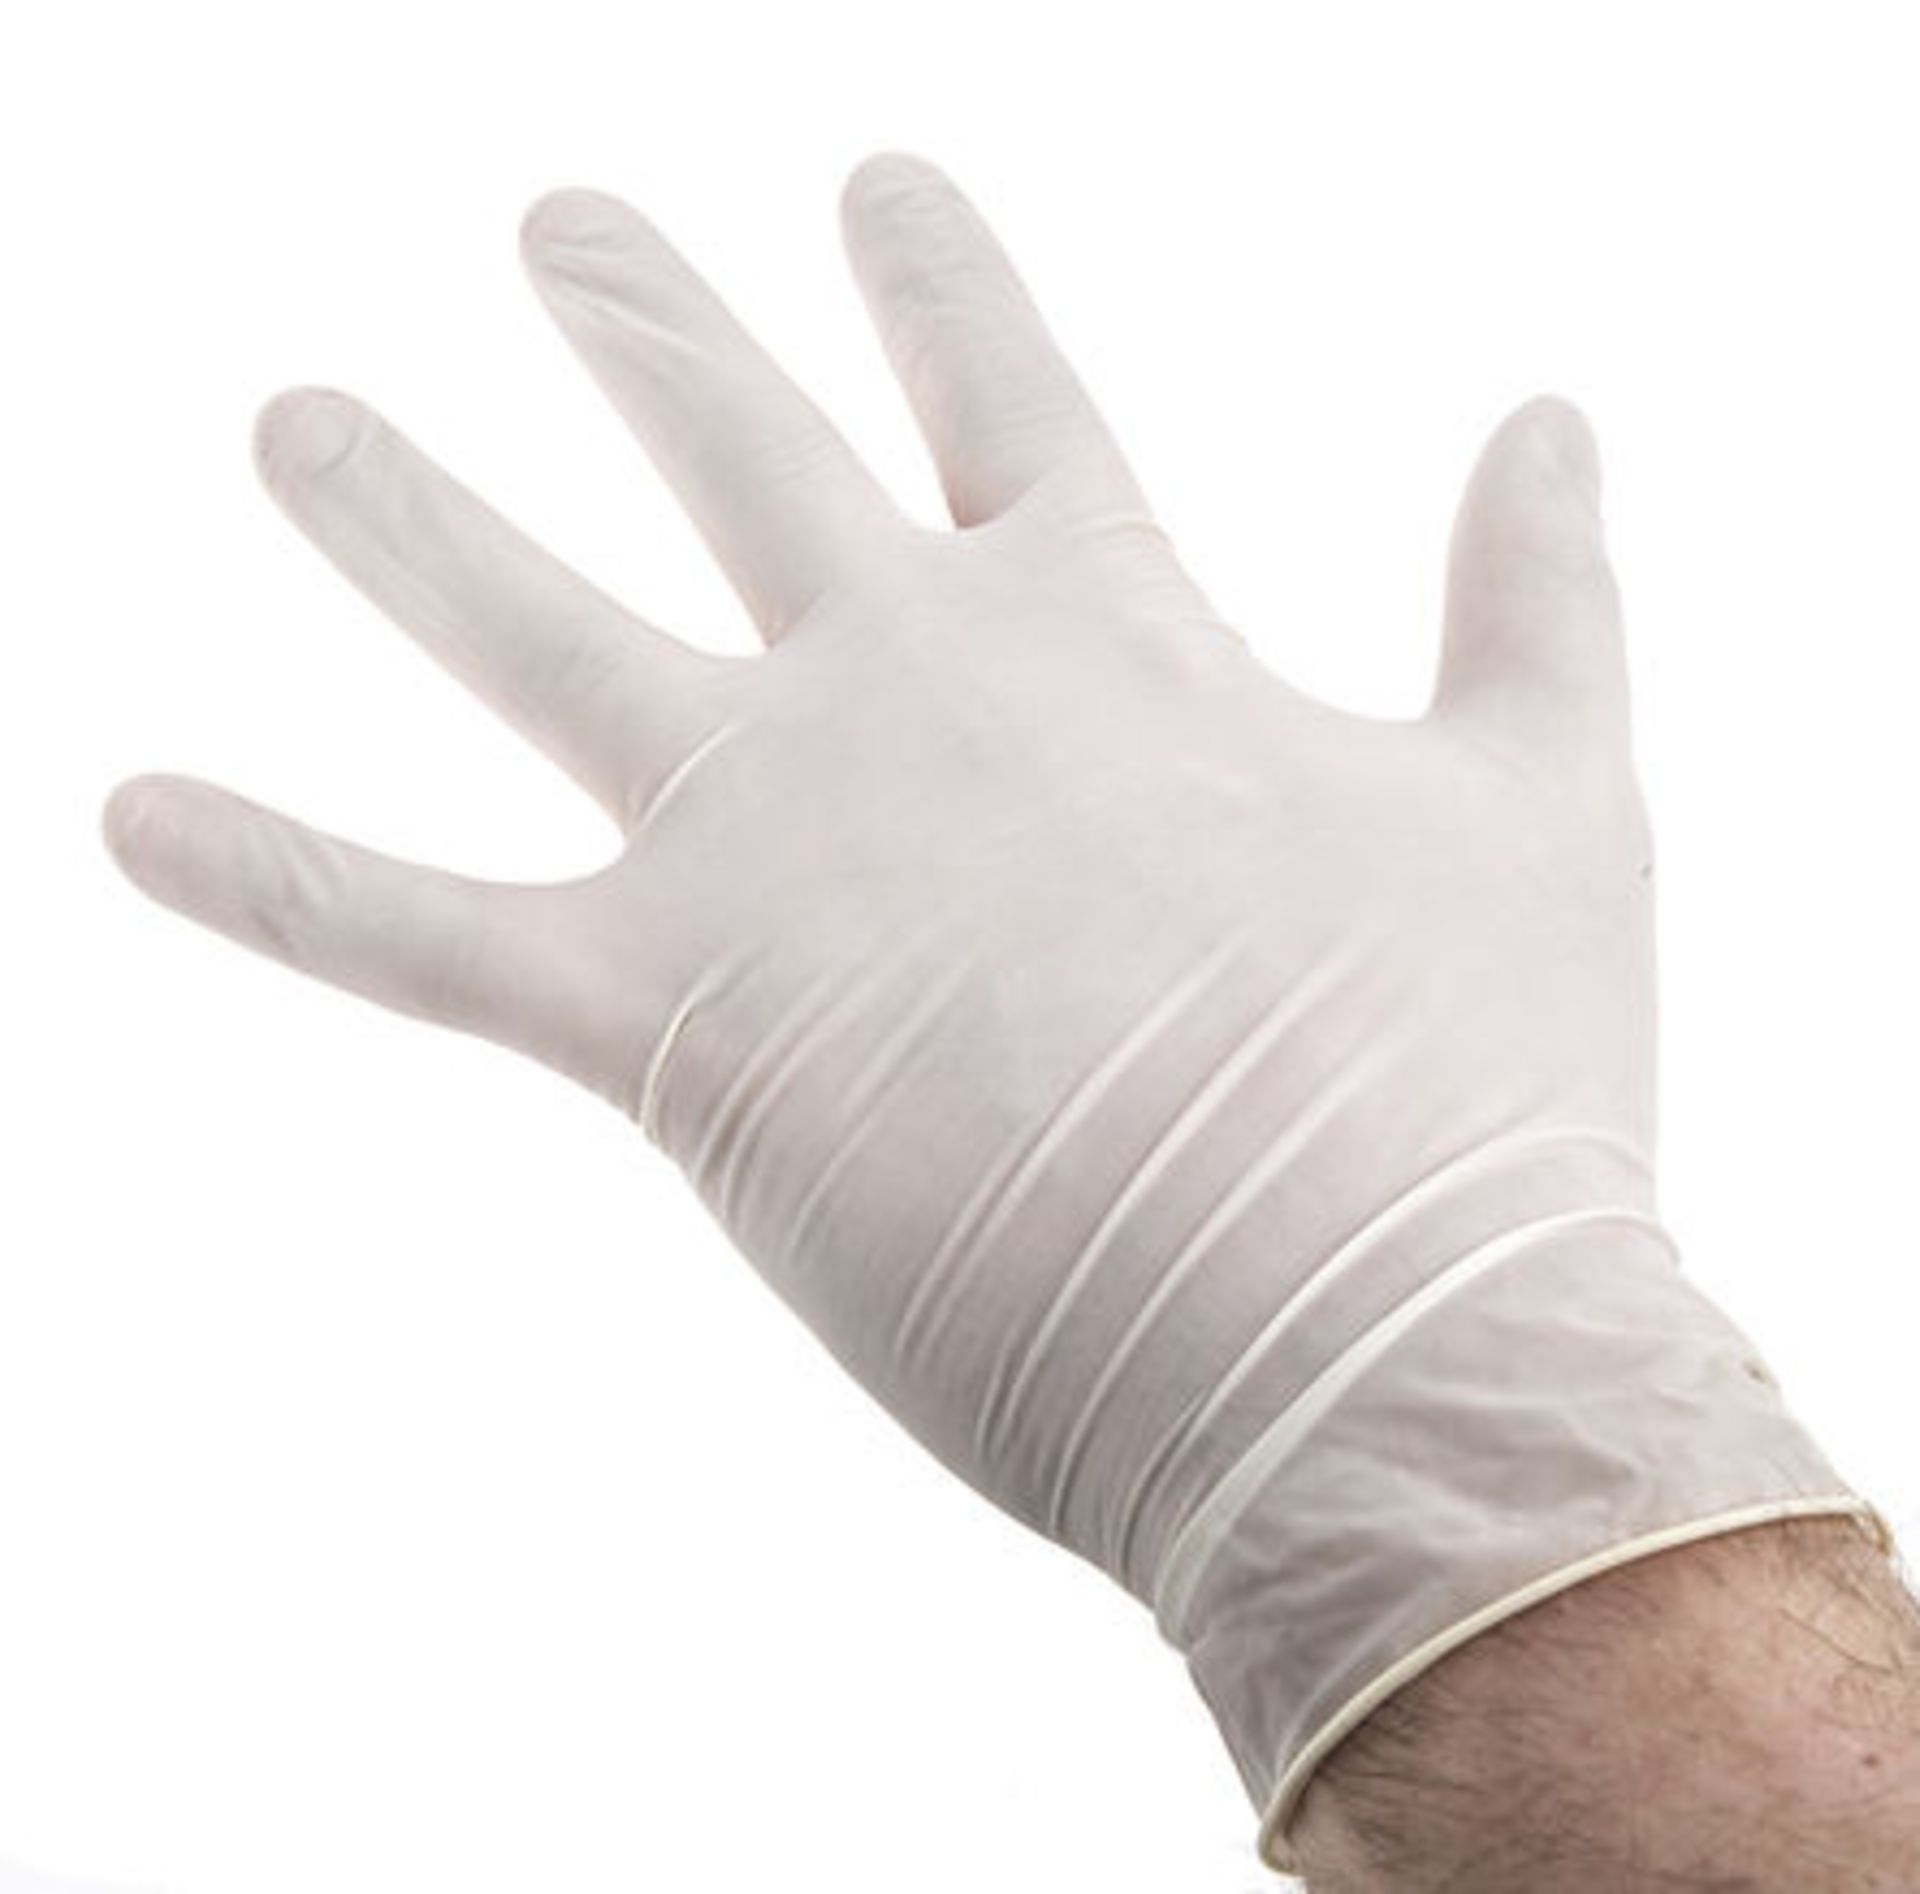 10 Boxes of 100 Ansell Latex Disposable Gloves - Image 2 of 2